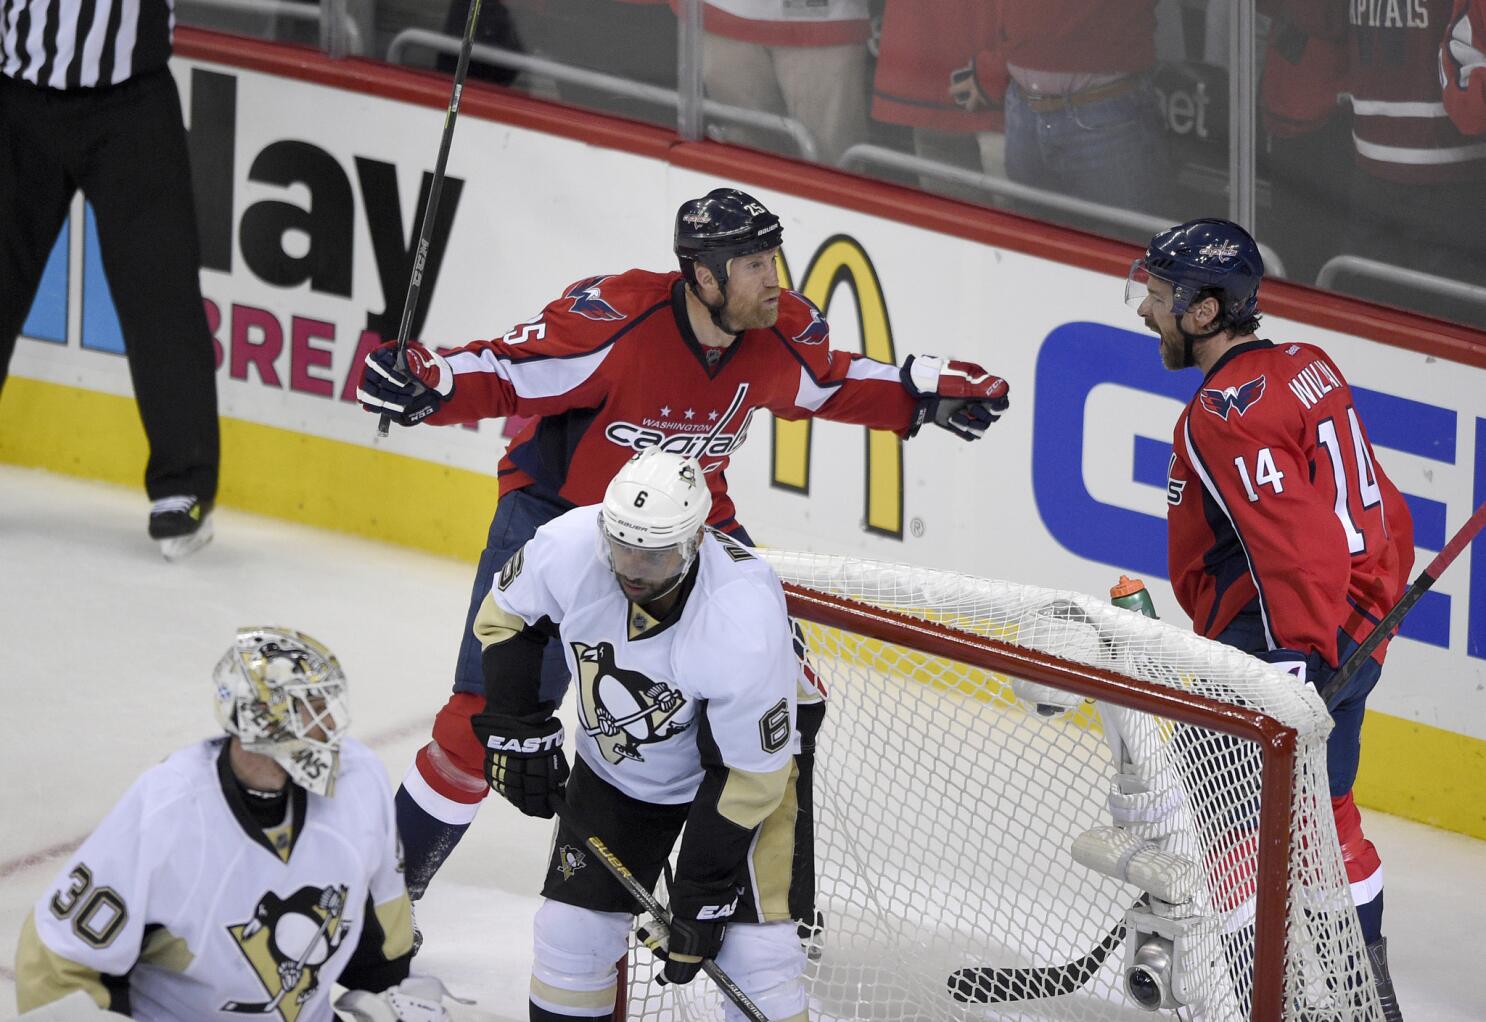 Washington Capitals' Alex Ovechkin, right, and Pittsburgh Penguins